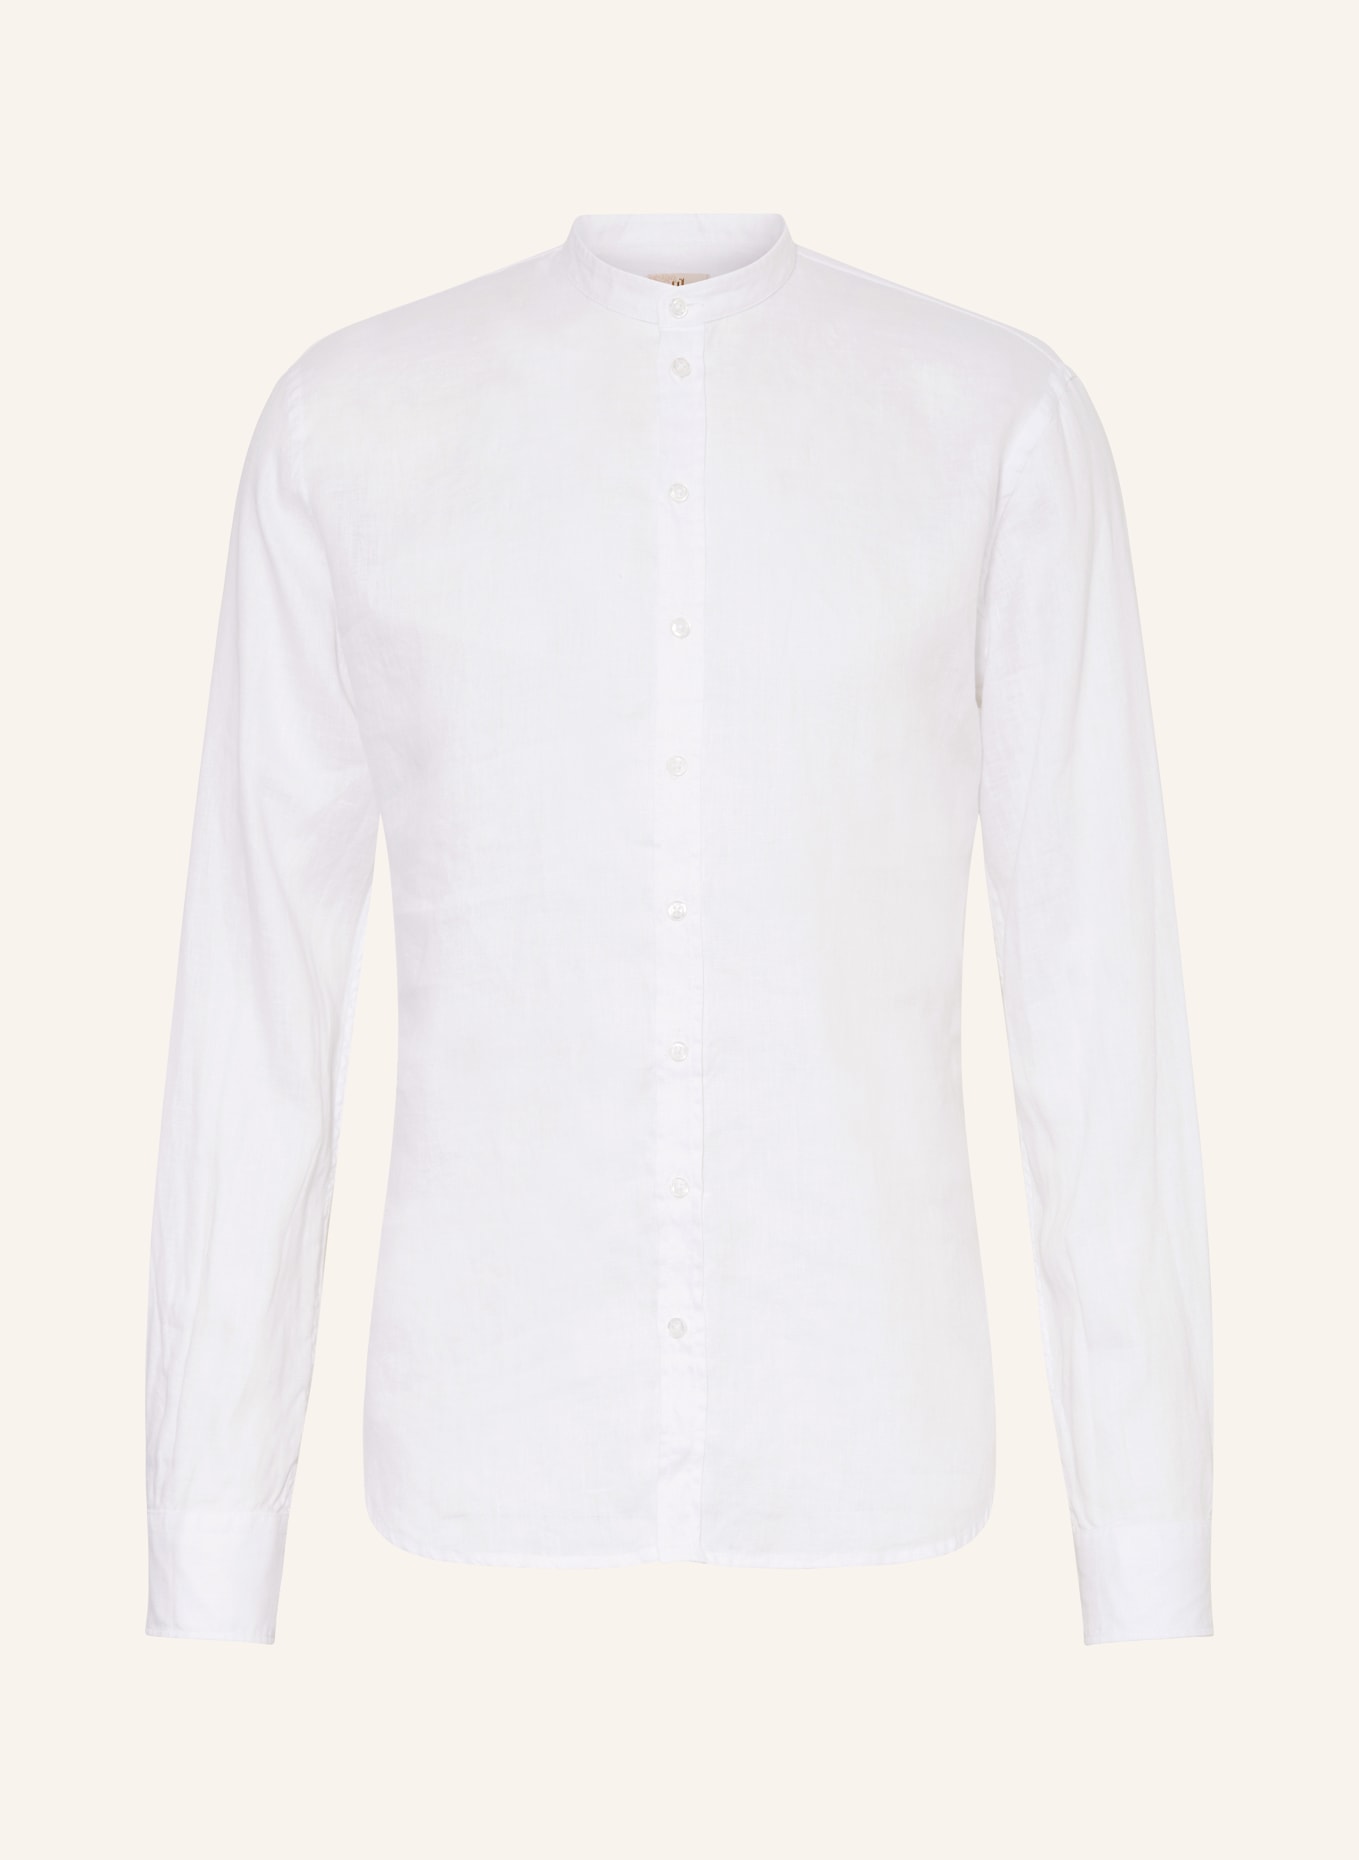 Q1 Manufaktur Linen shirt slim relaxed fit with stand-up collar, Color: WHITE (Image 1)